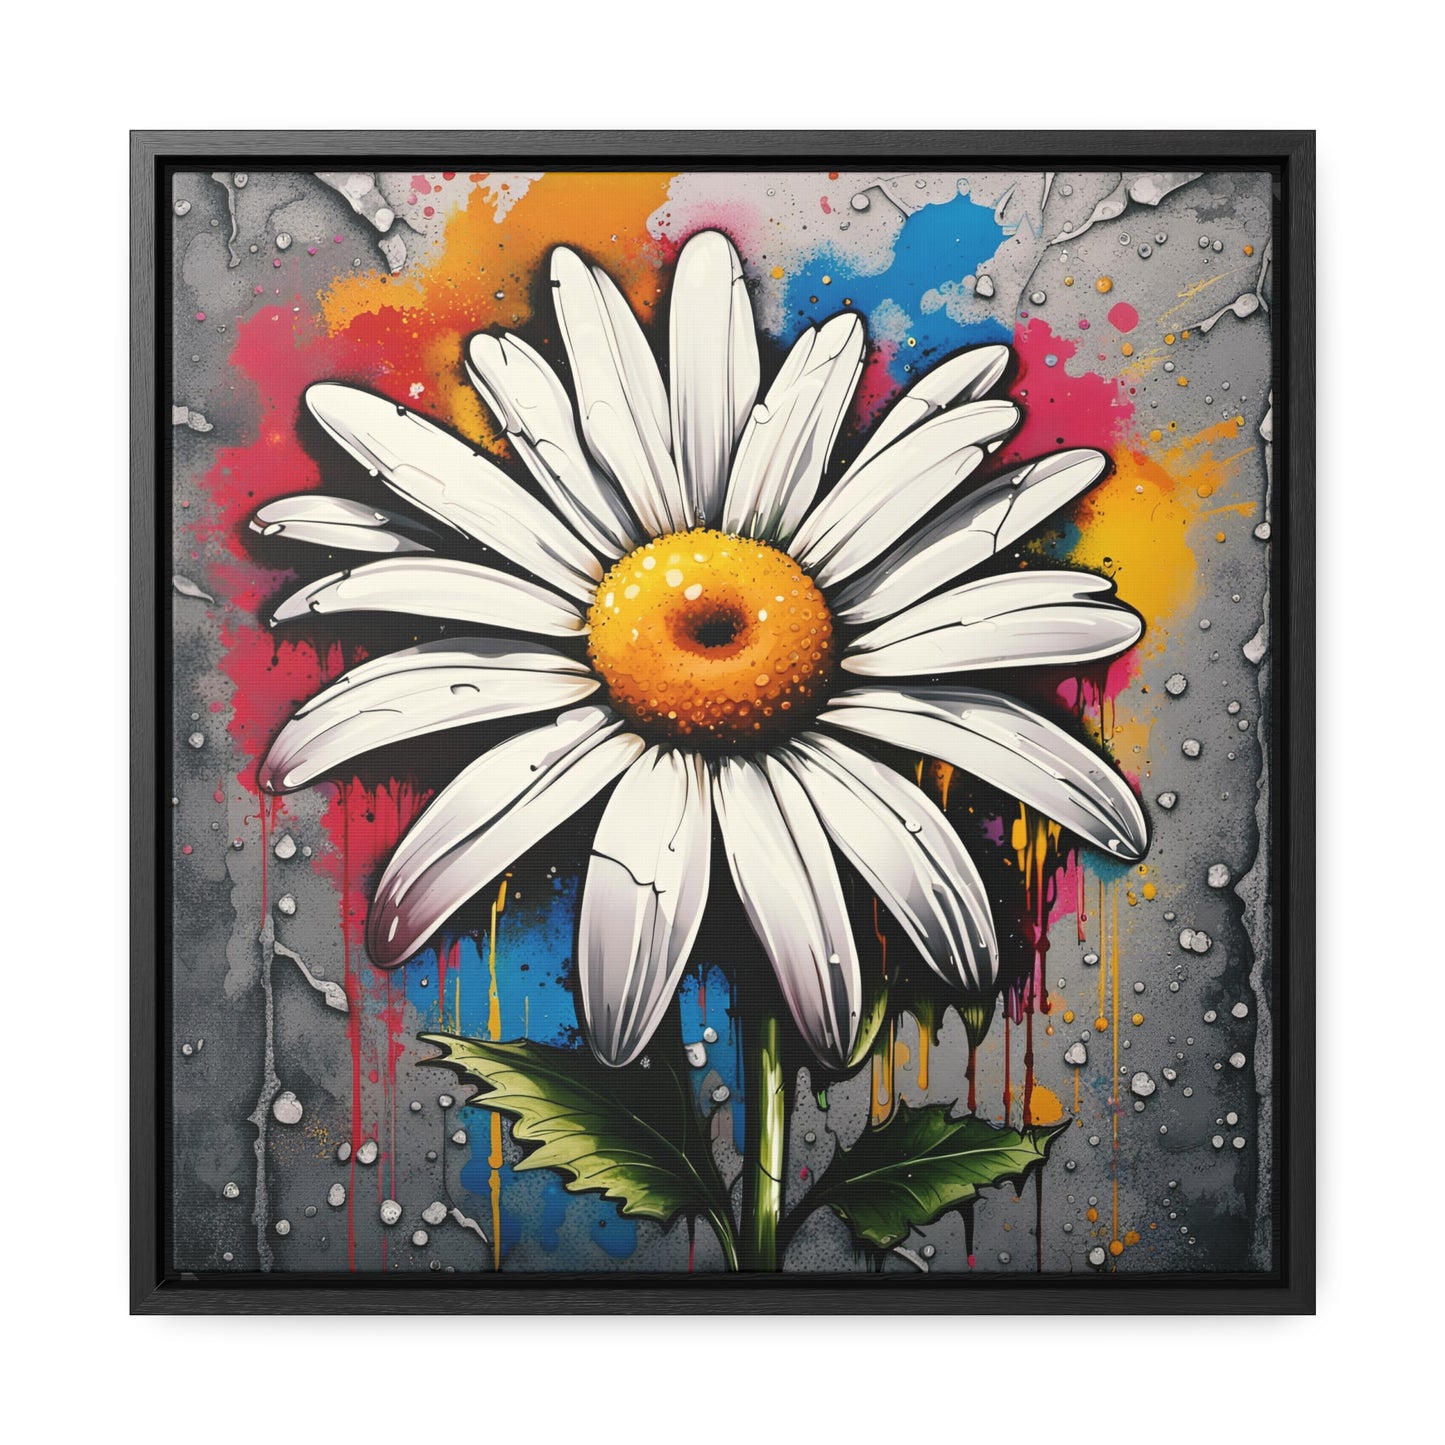 Floral themed Wall Art Print - Street Art Style Graffiti Daisy Printed on Canvas in a Floating Frame